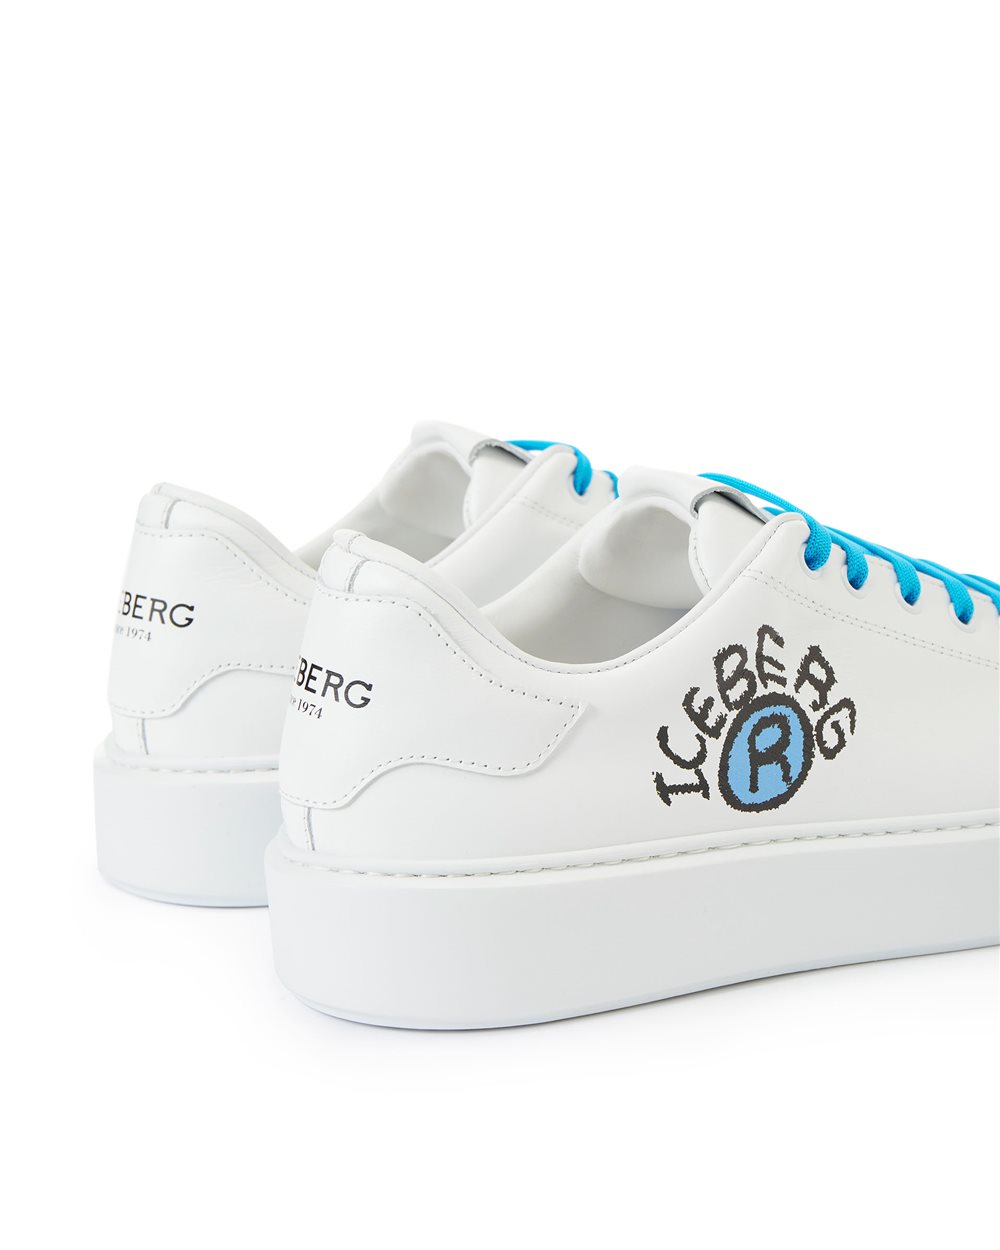 Carson sneakers with logo - Iceberg - Official Website